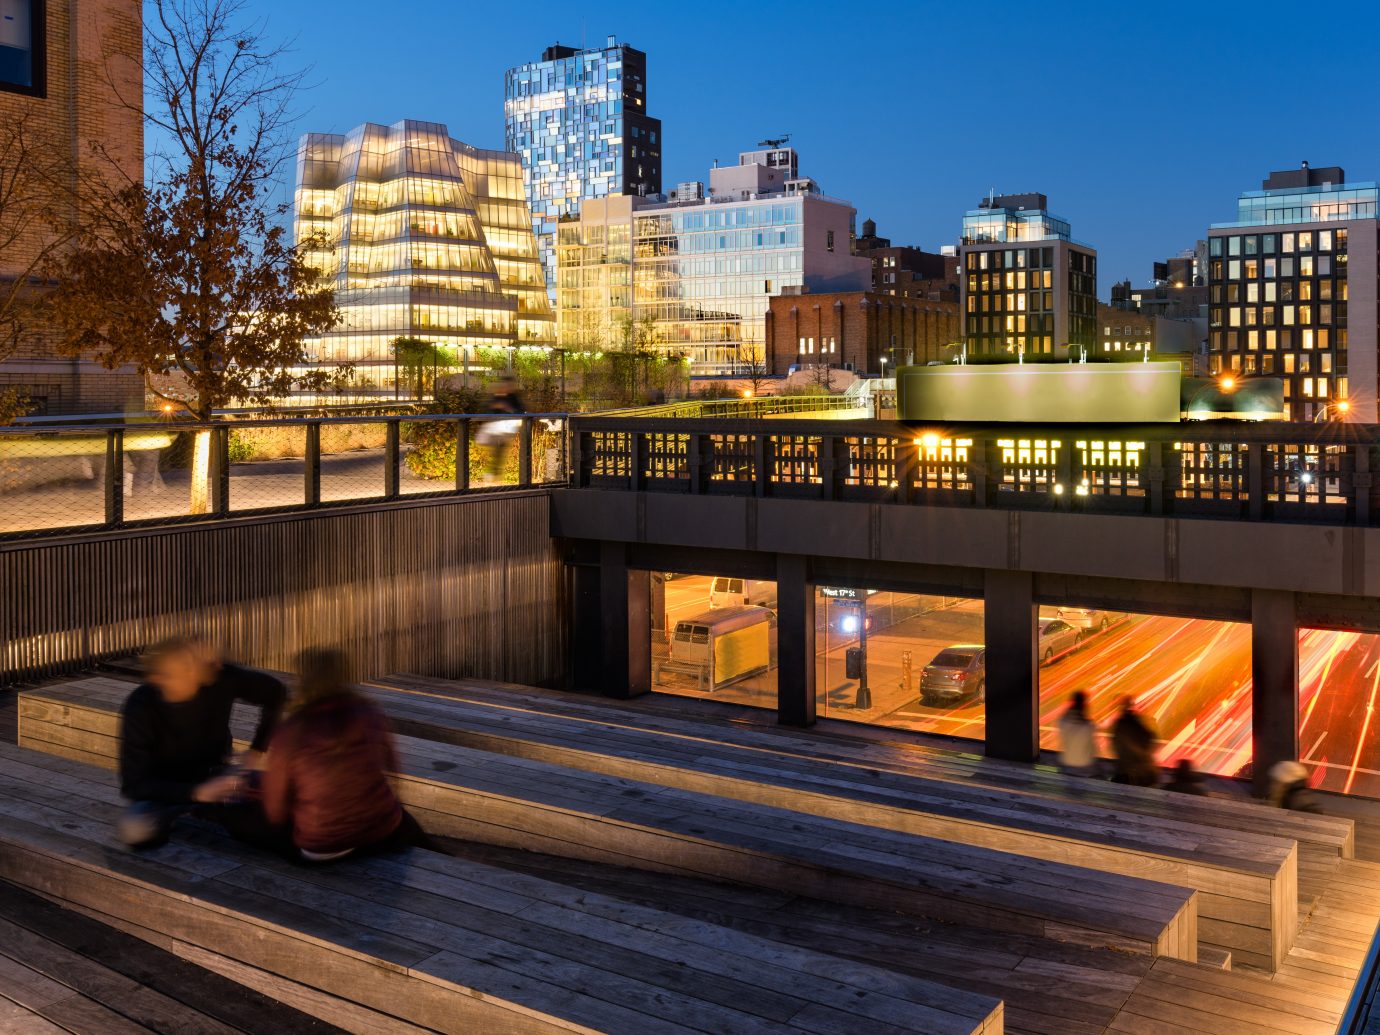 CROP of The High Line at twilight with a view on 10th Avenue with skyscrapers and building illumination. Chelsea, Manhattan, new York City, USA